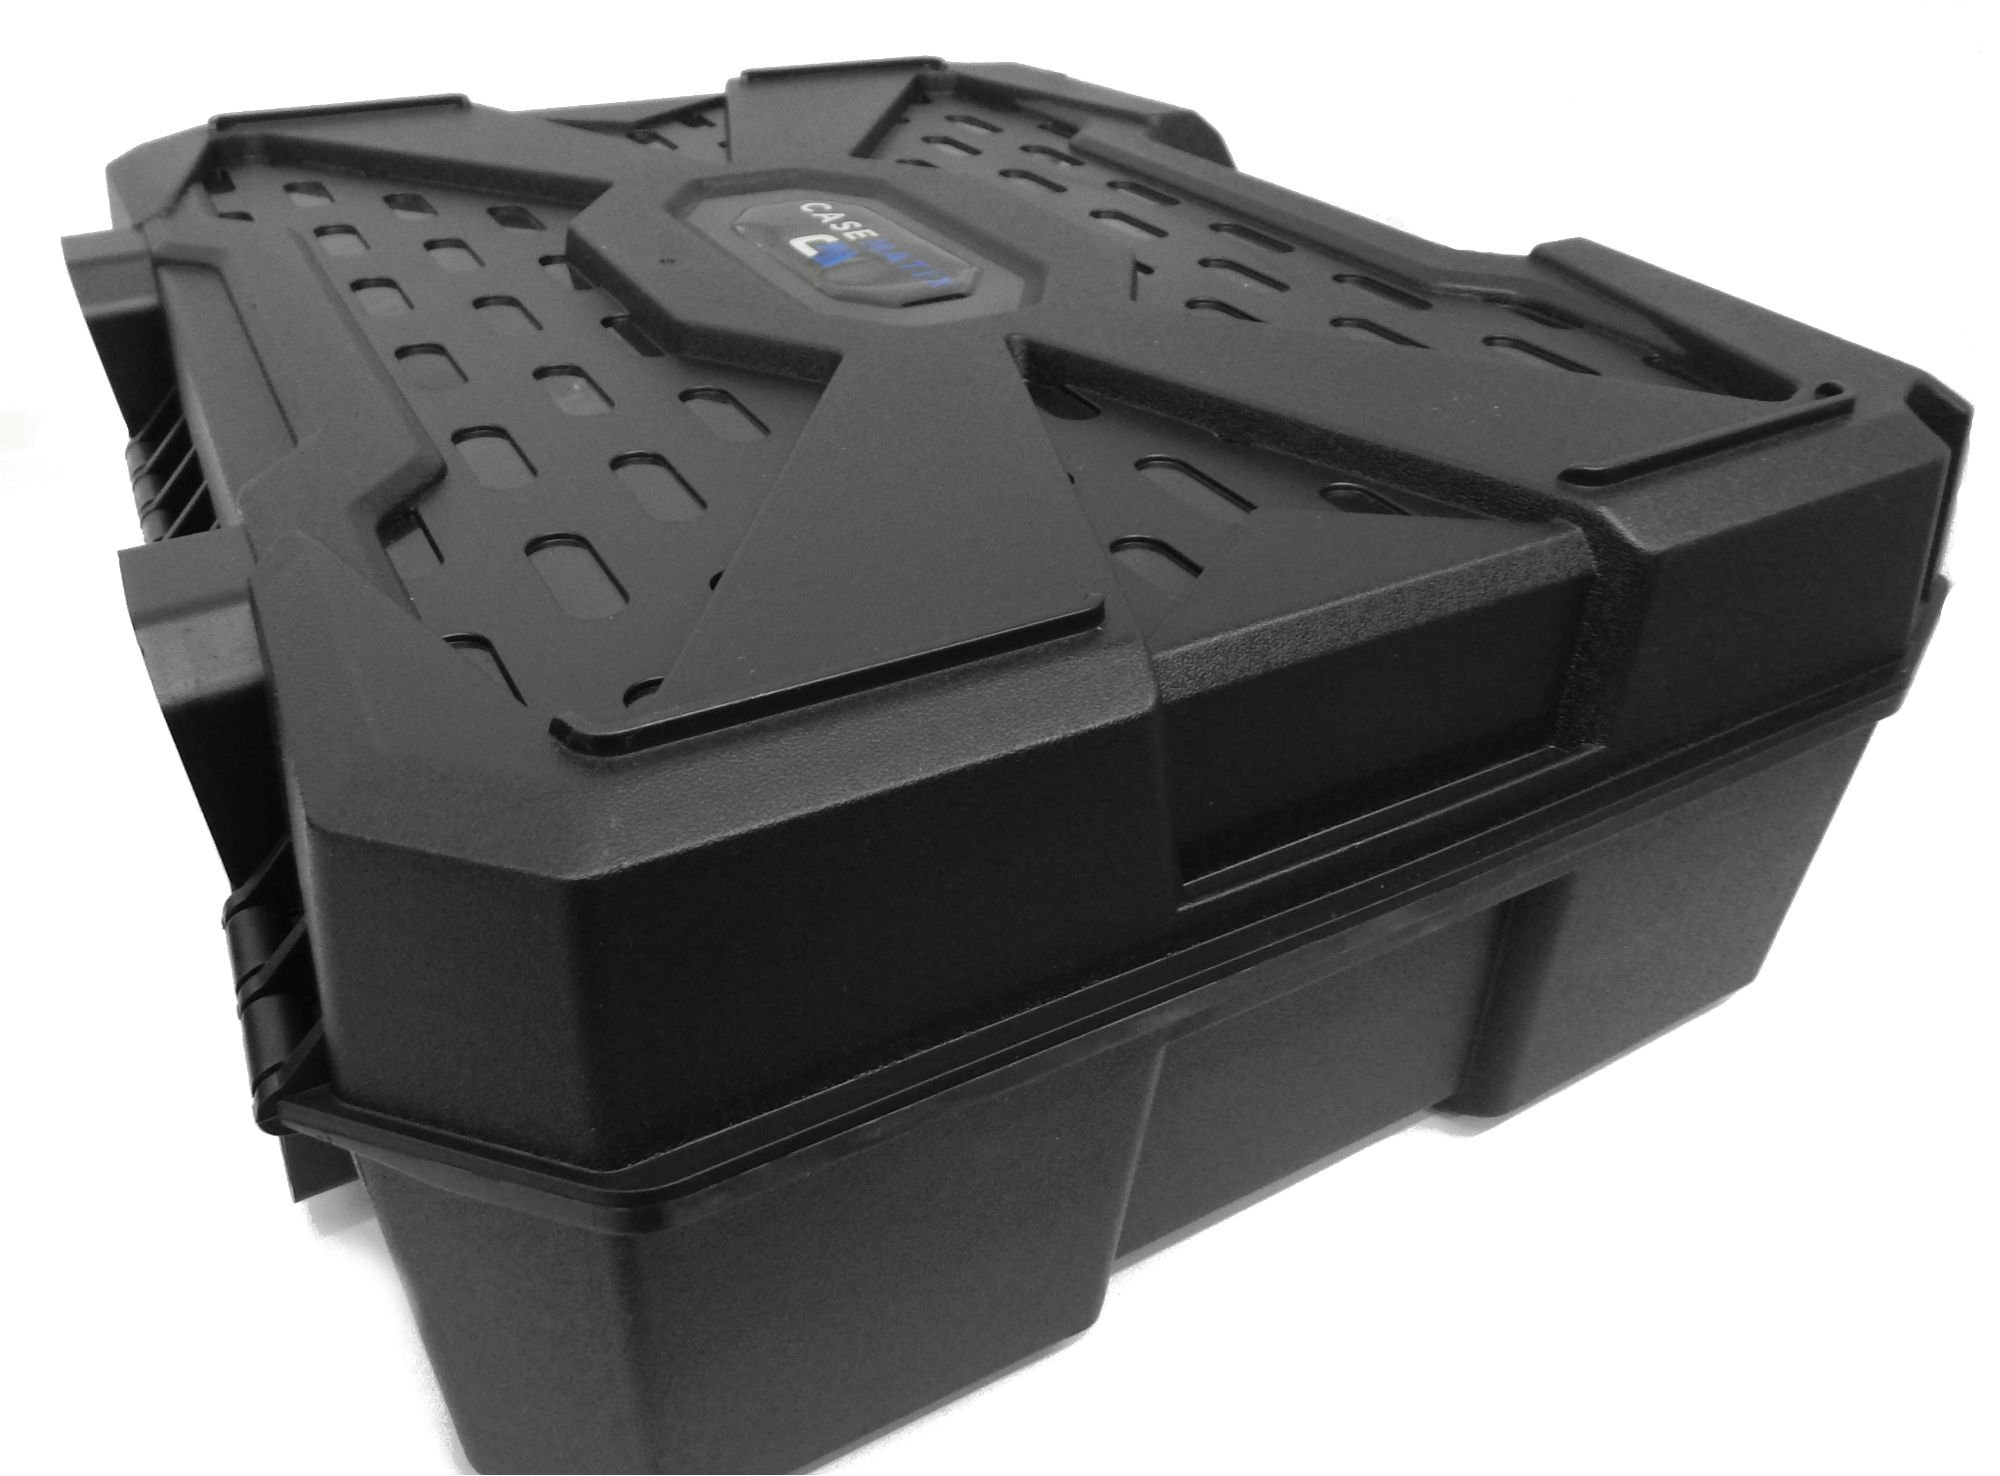 CASEMATIX Projector Travel Case Compatible with ViewSonic PA503S, PA503W, PA503X, PG703W, PG703 Projectors, HDMI Cable and Remote, Case Only